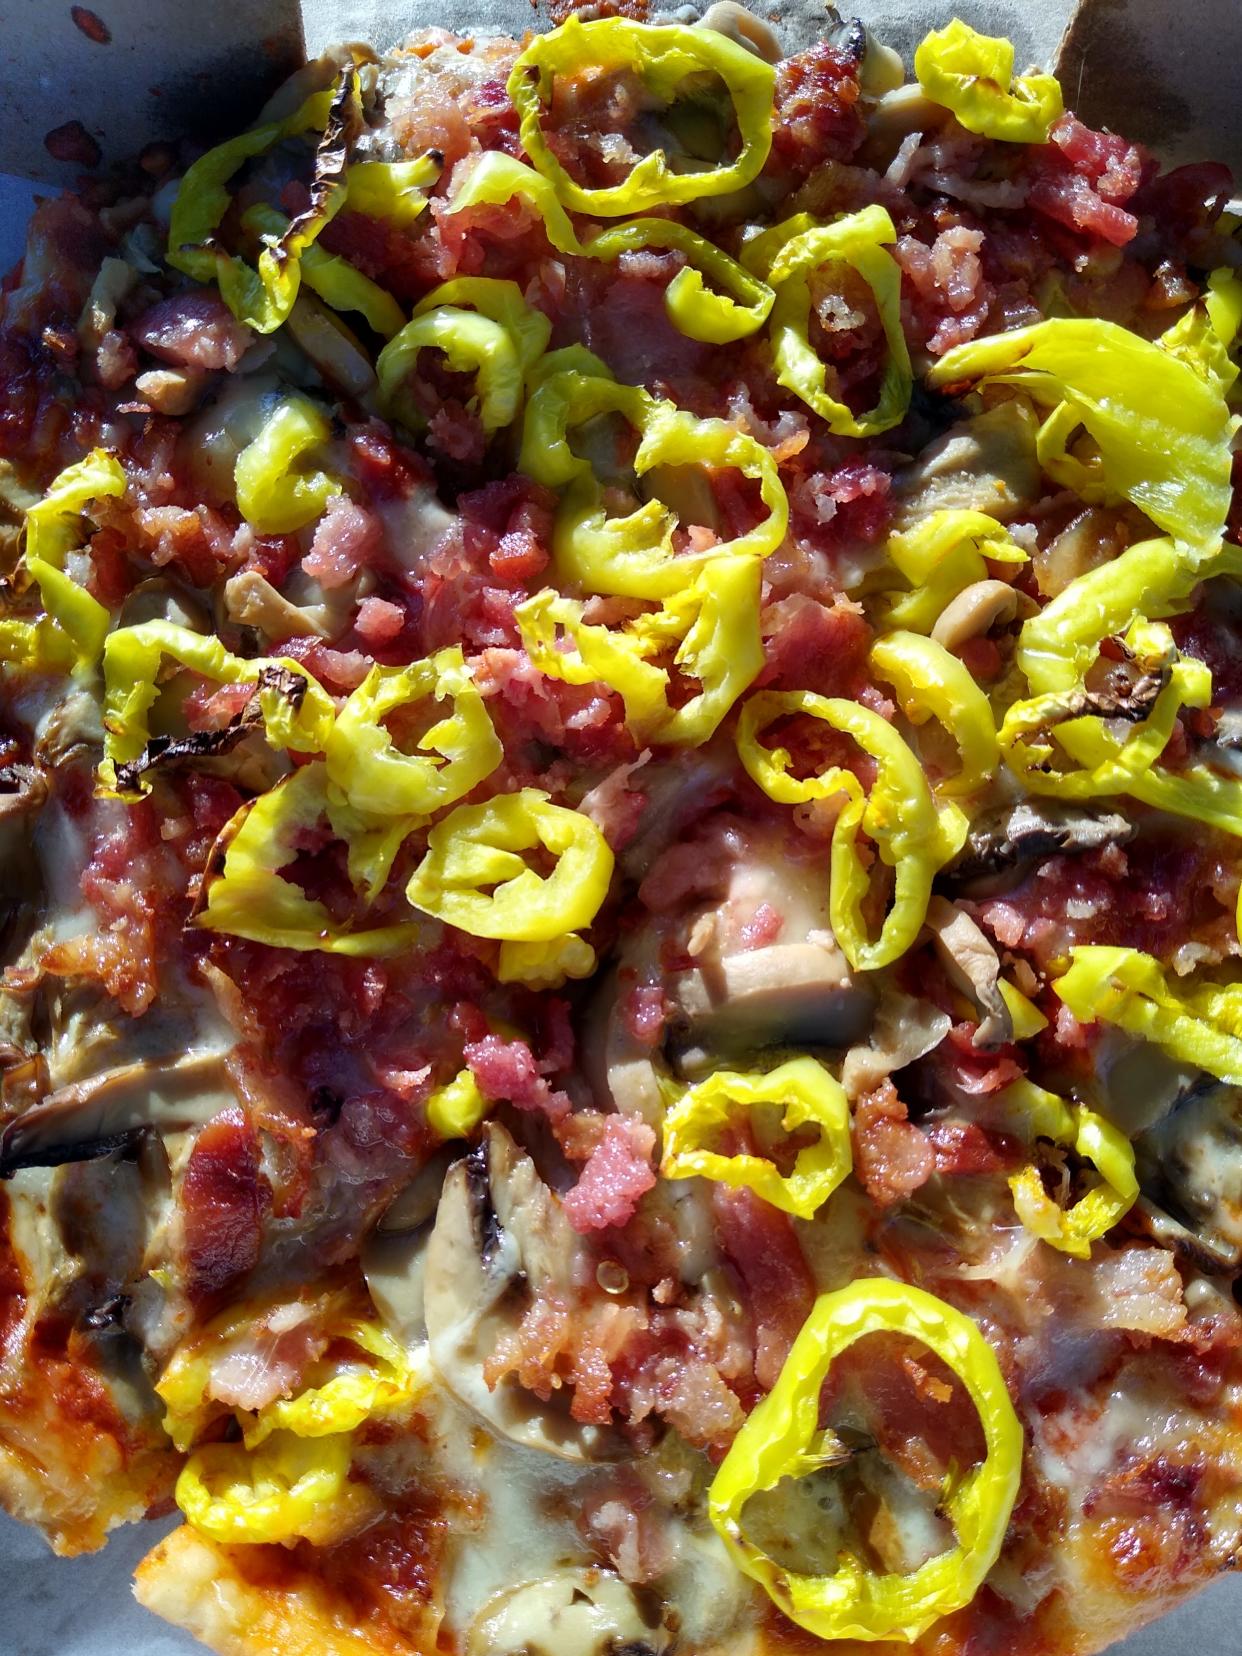 A small cheese pizza with mushrooms, bacon and banana peppers is served at Fiesta Pizza and Chicken in Goodyear Heights.